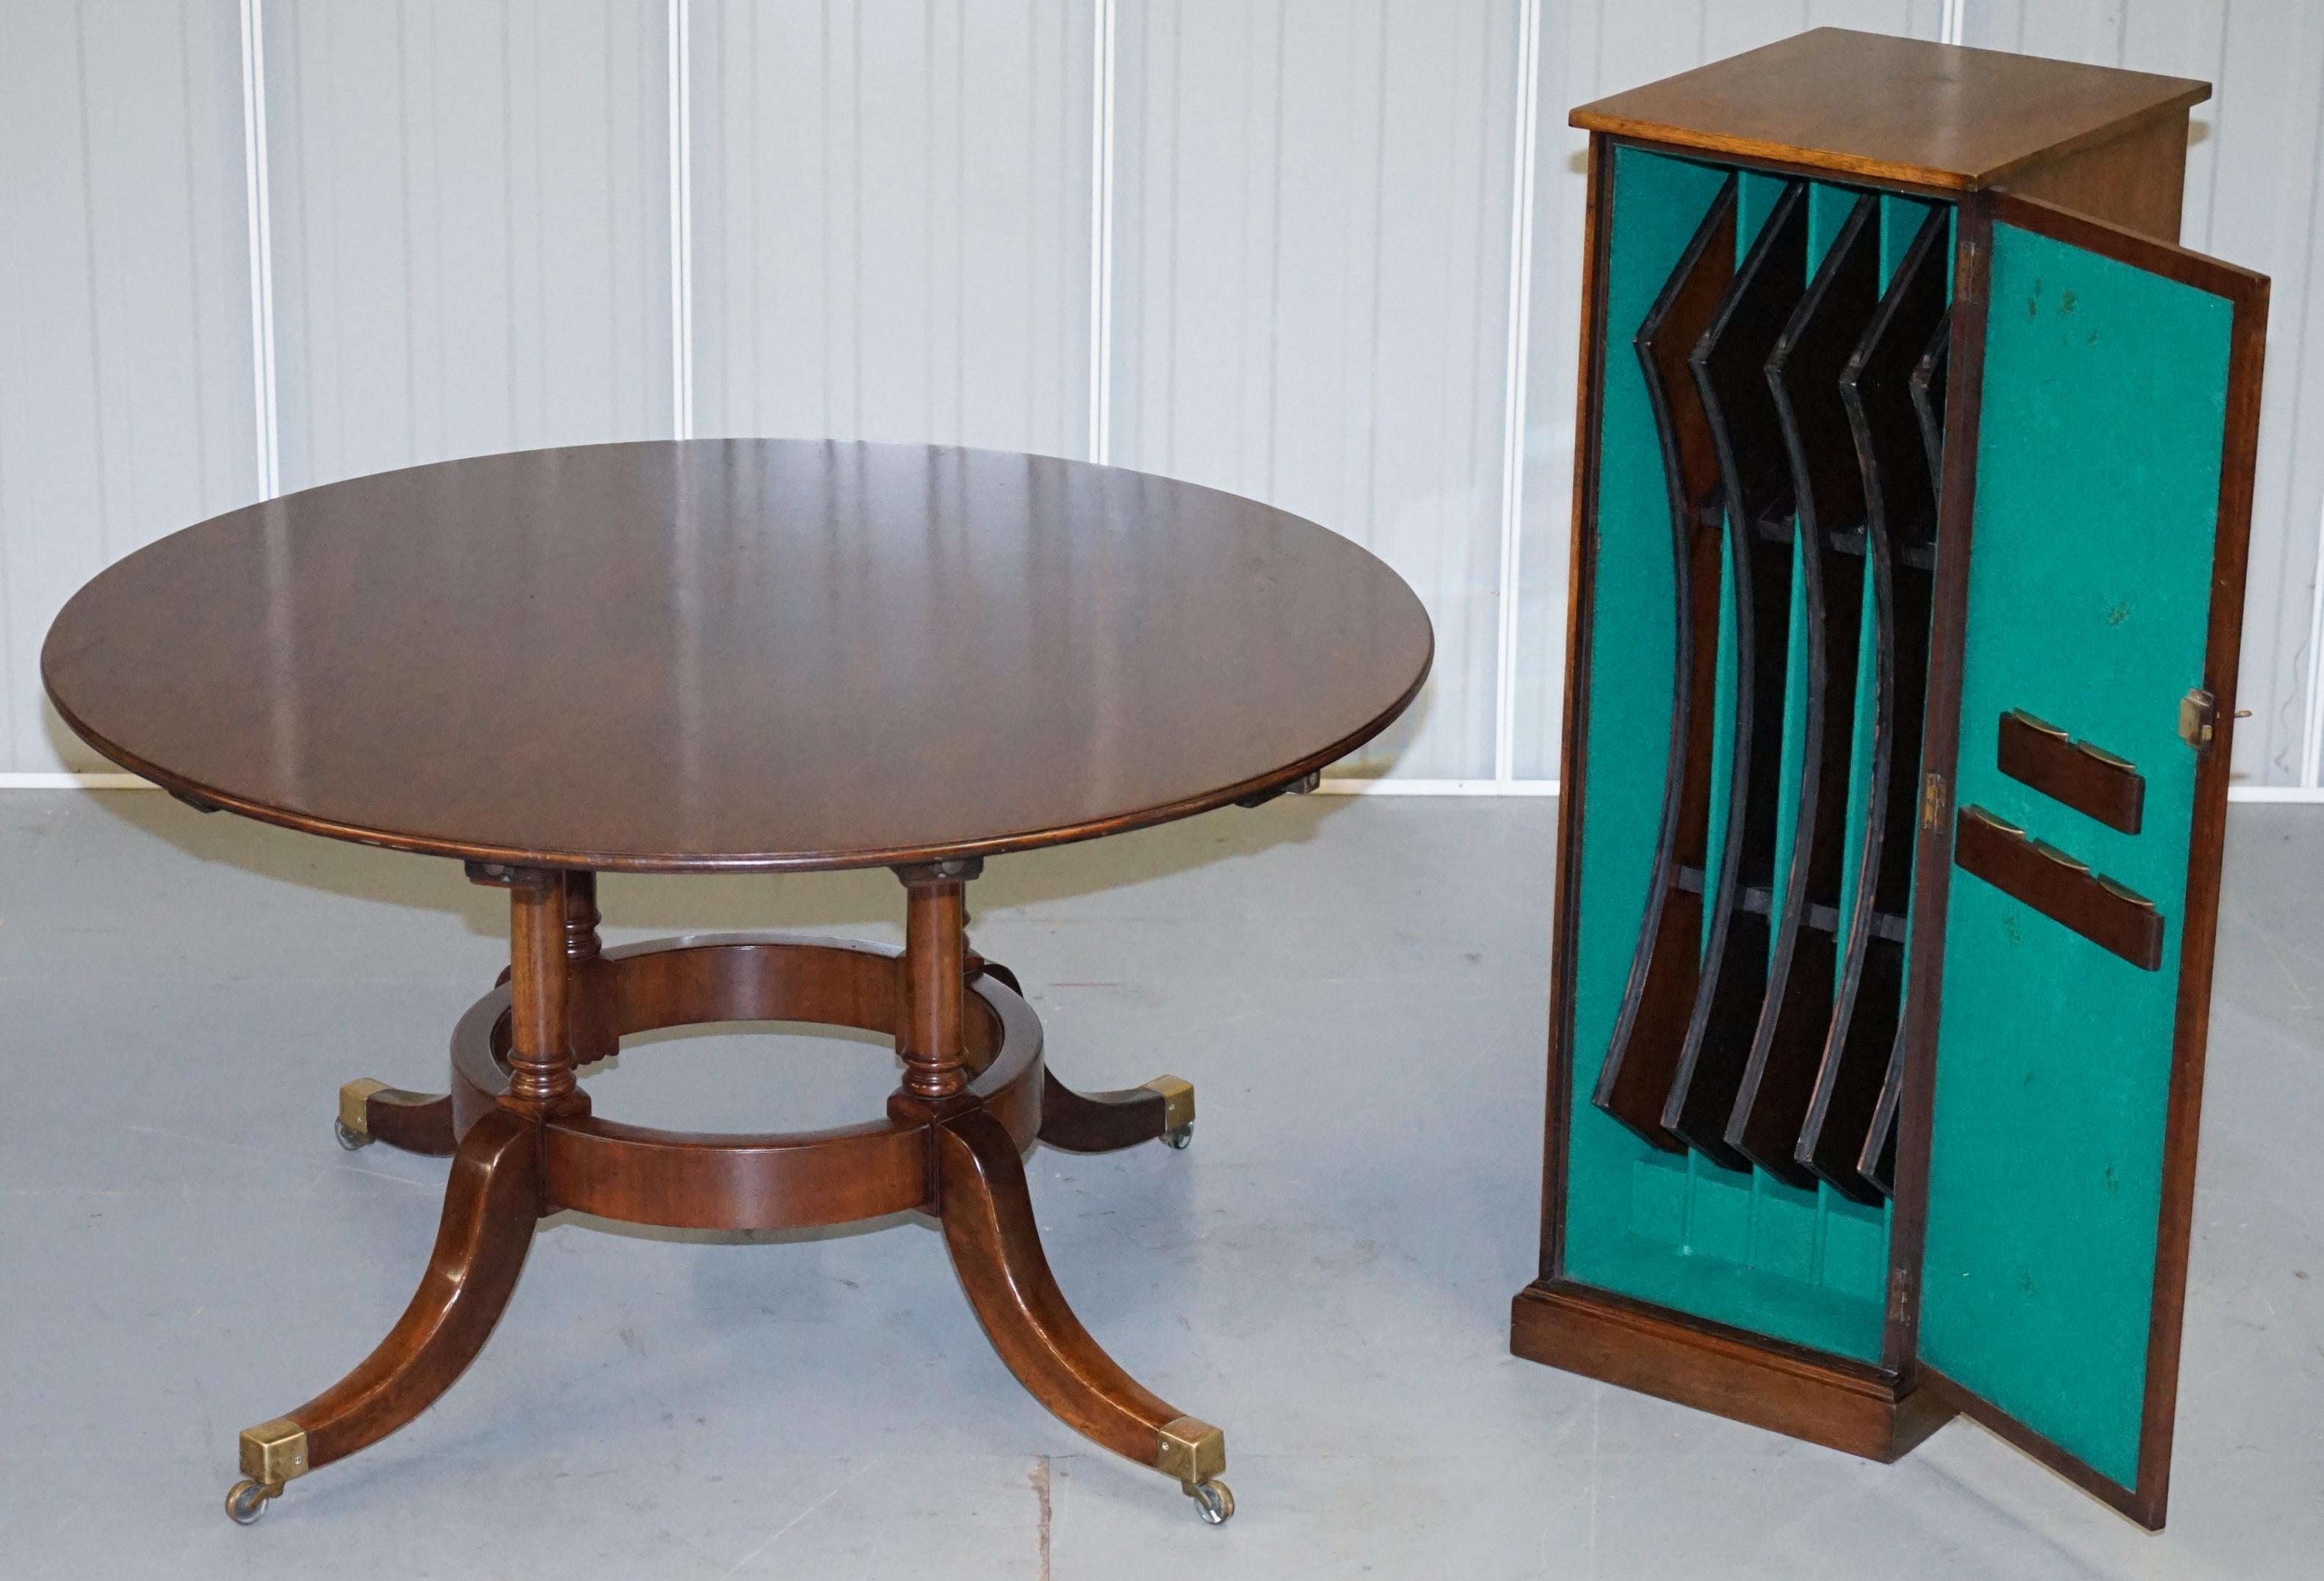 We are delighted to offer for sale this stunning Brights of Nettlebed RRP £15,000 mahogany and brass Jupe round extending dining table

A very expensive and well made table. Retailed and made by Brights of Nettlebed in England, the table is all